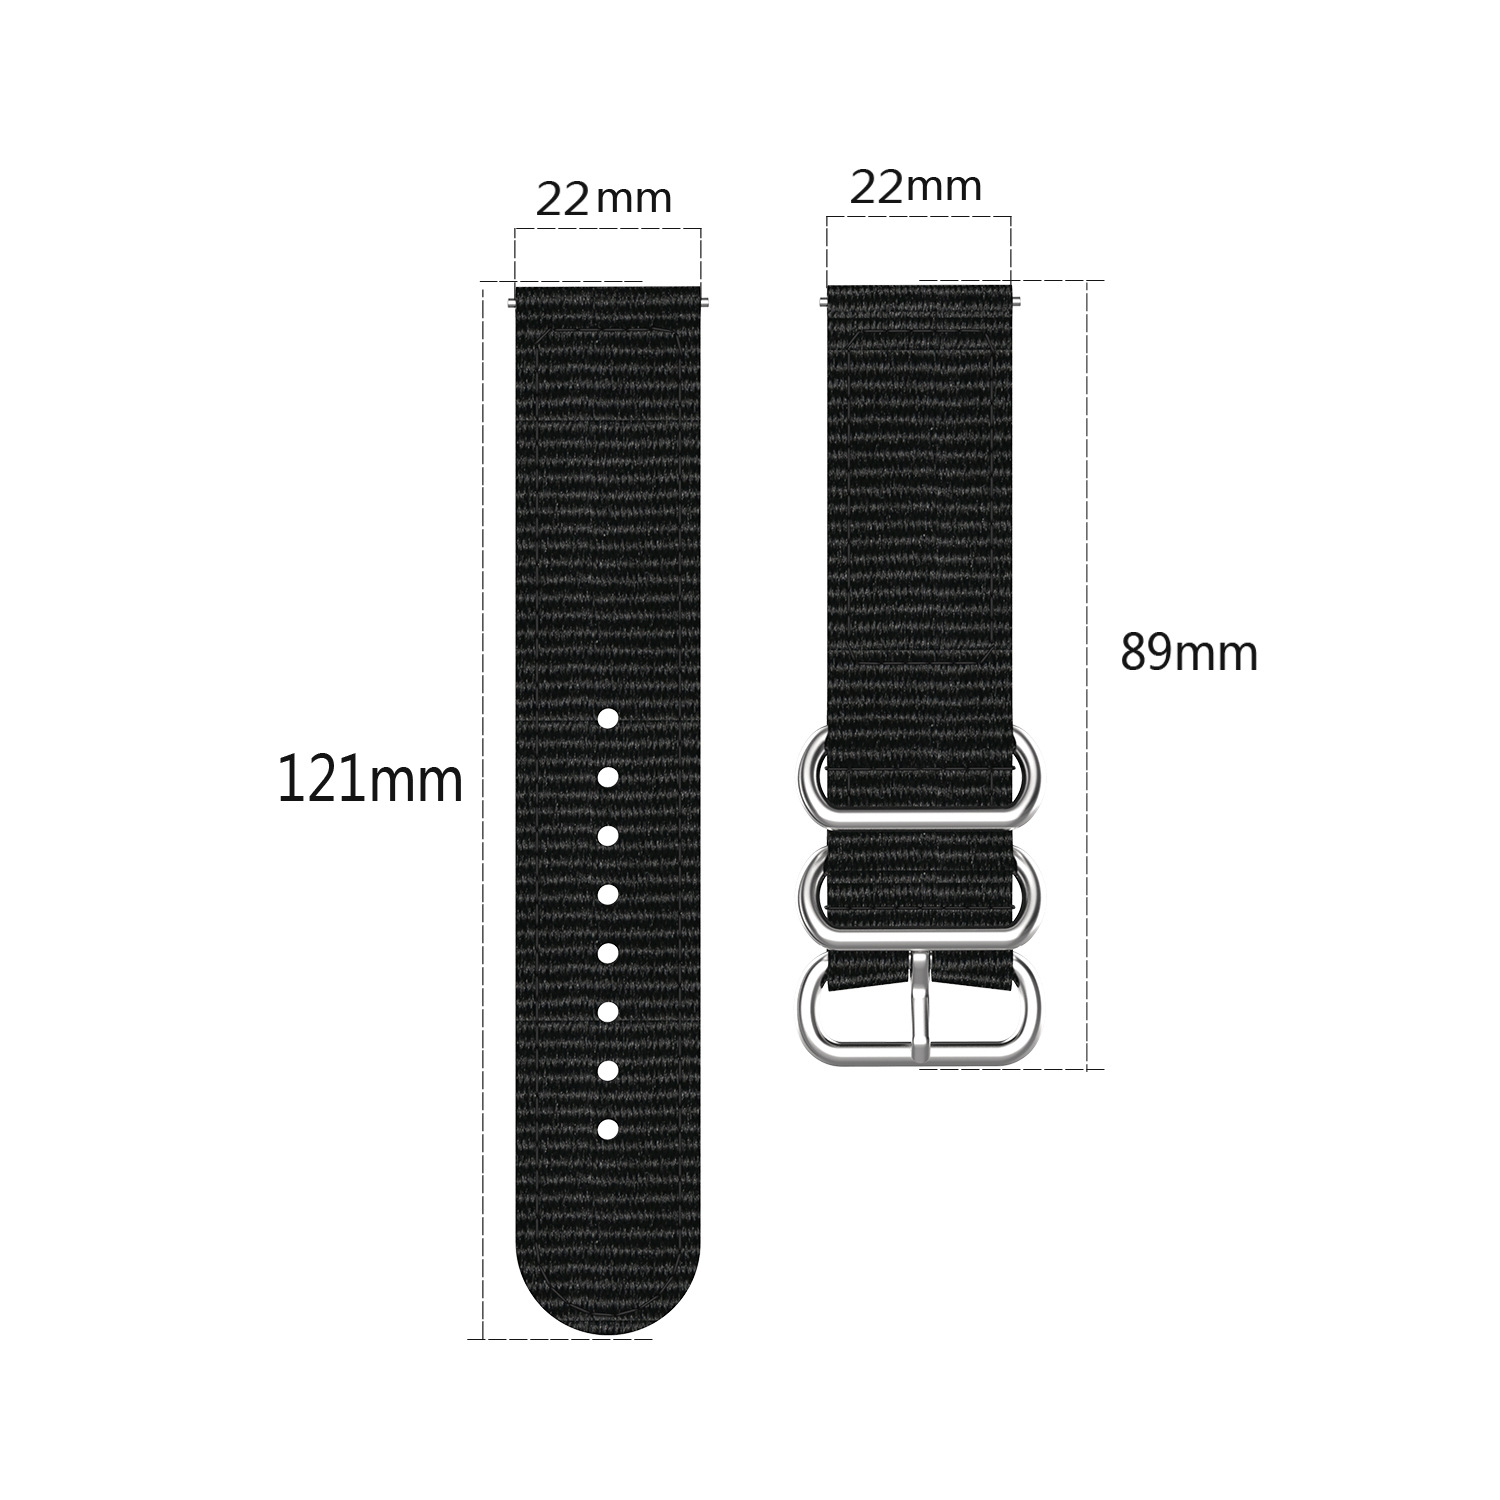 Bakeey-2022mm-Width-Breathable-Sweatproof-Nylon-Canvas-Watch-Band-Strap-Replacement-for-Huawei-Watch-1926643-34